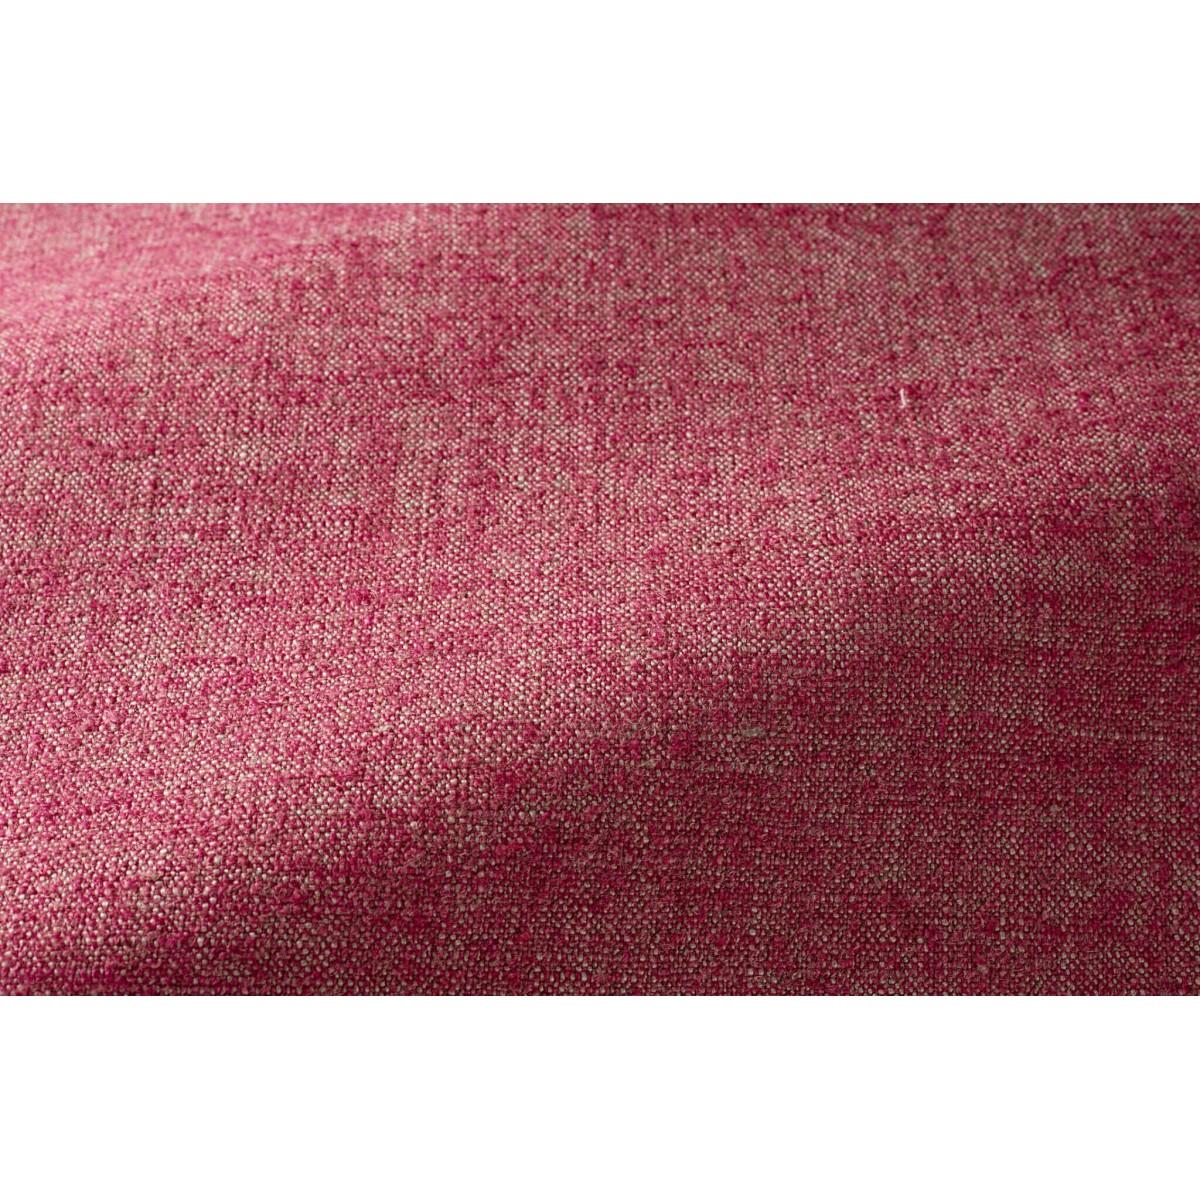 Popus Editions Graziella 3 seater sofa in fuschia london linen fabric.

A foot that hides another. A cushion that hides another. A curve that hides another with contemporary lines and a base like a punctuation mark, this sofa gives pride of place